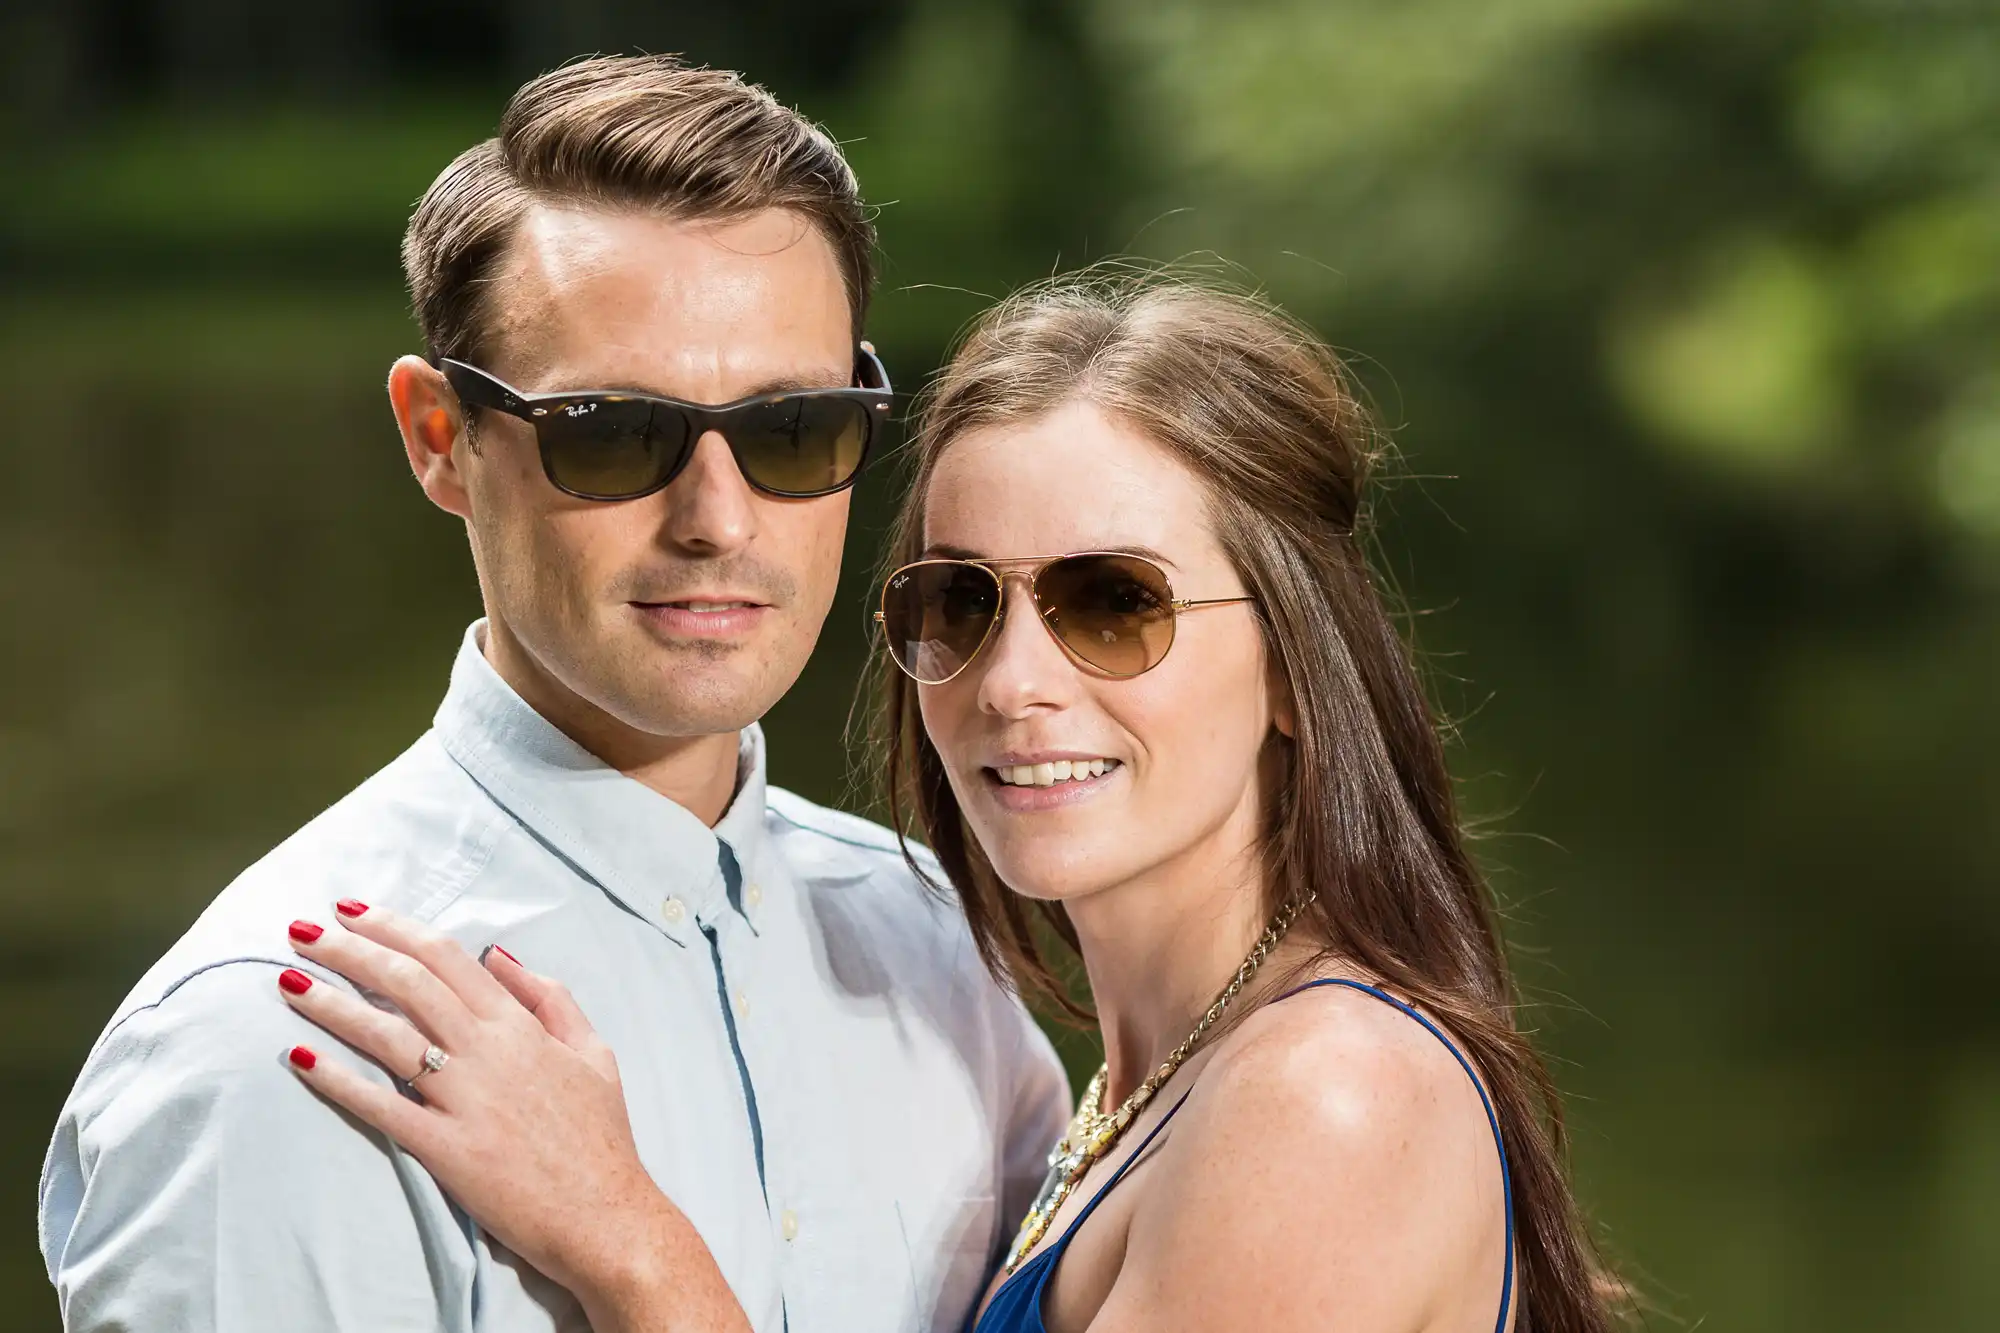 A man and woman wearing sunglasses standing close together in a park, smiling slightly towards the camera.